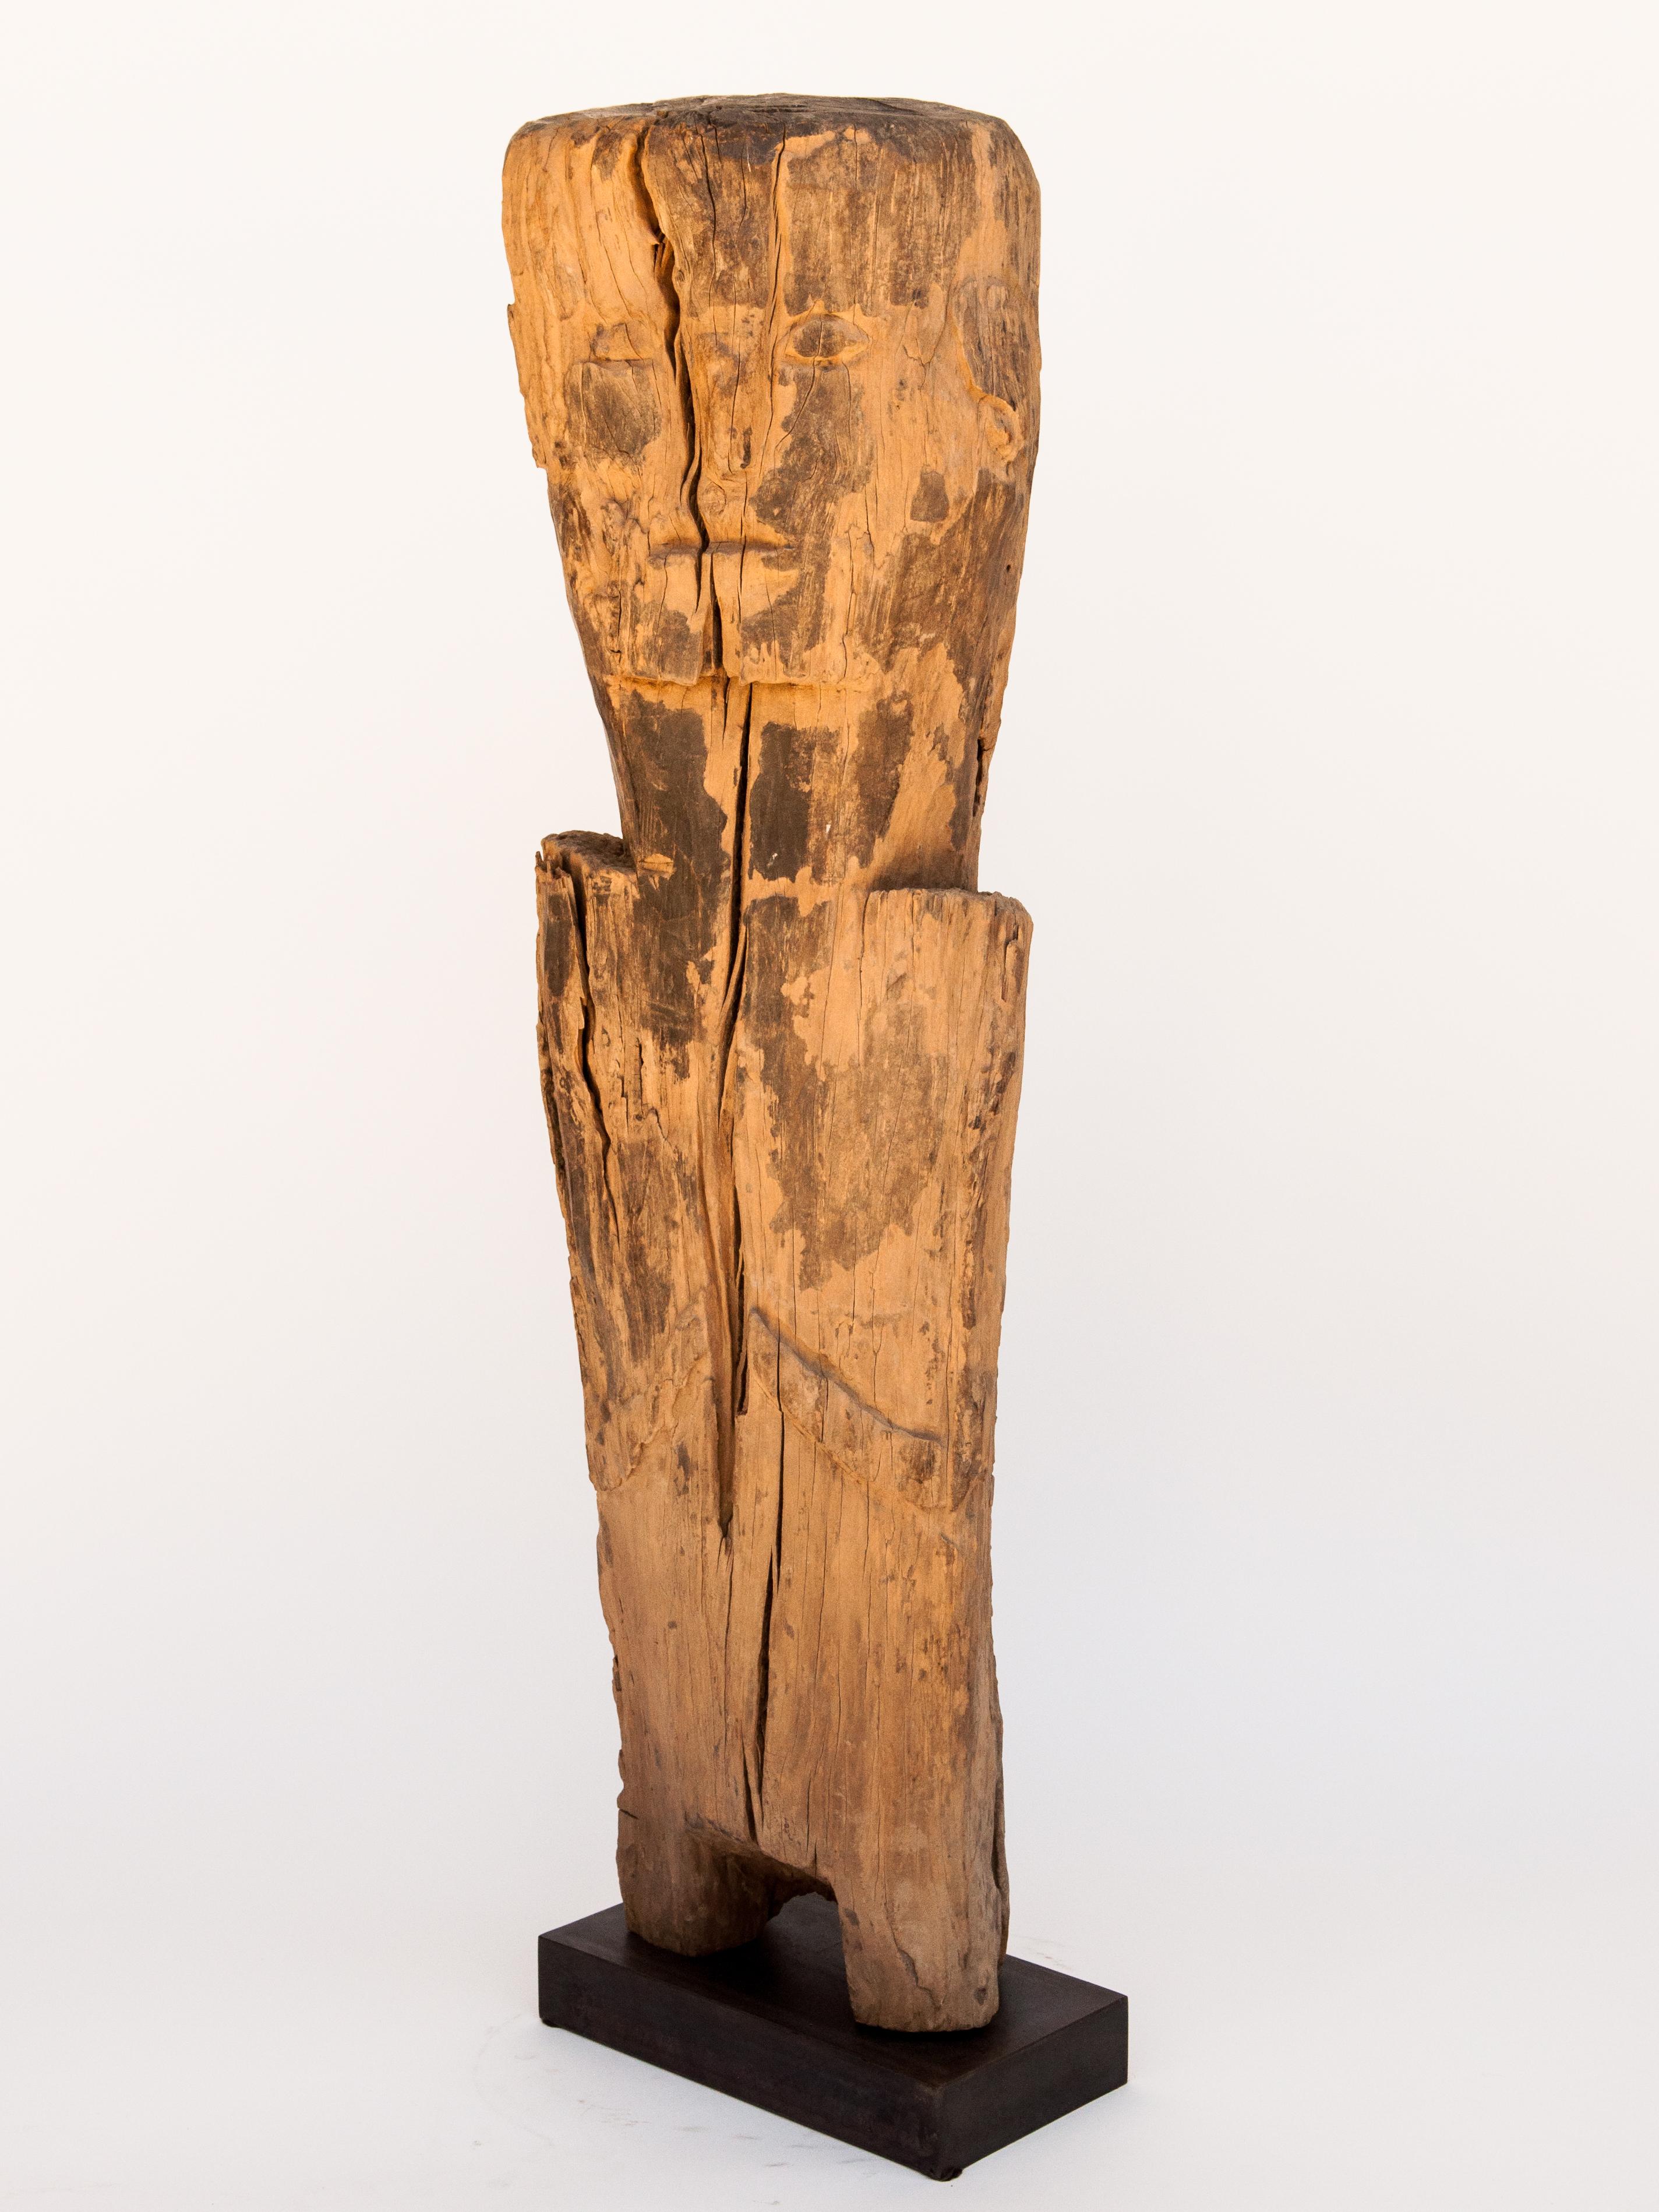 Wooden Tribal Statue or Bridge Figure from West Nepal, Early to Mid-20th Century 13